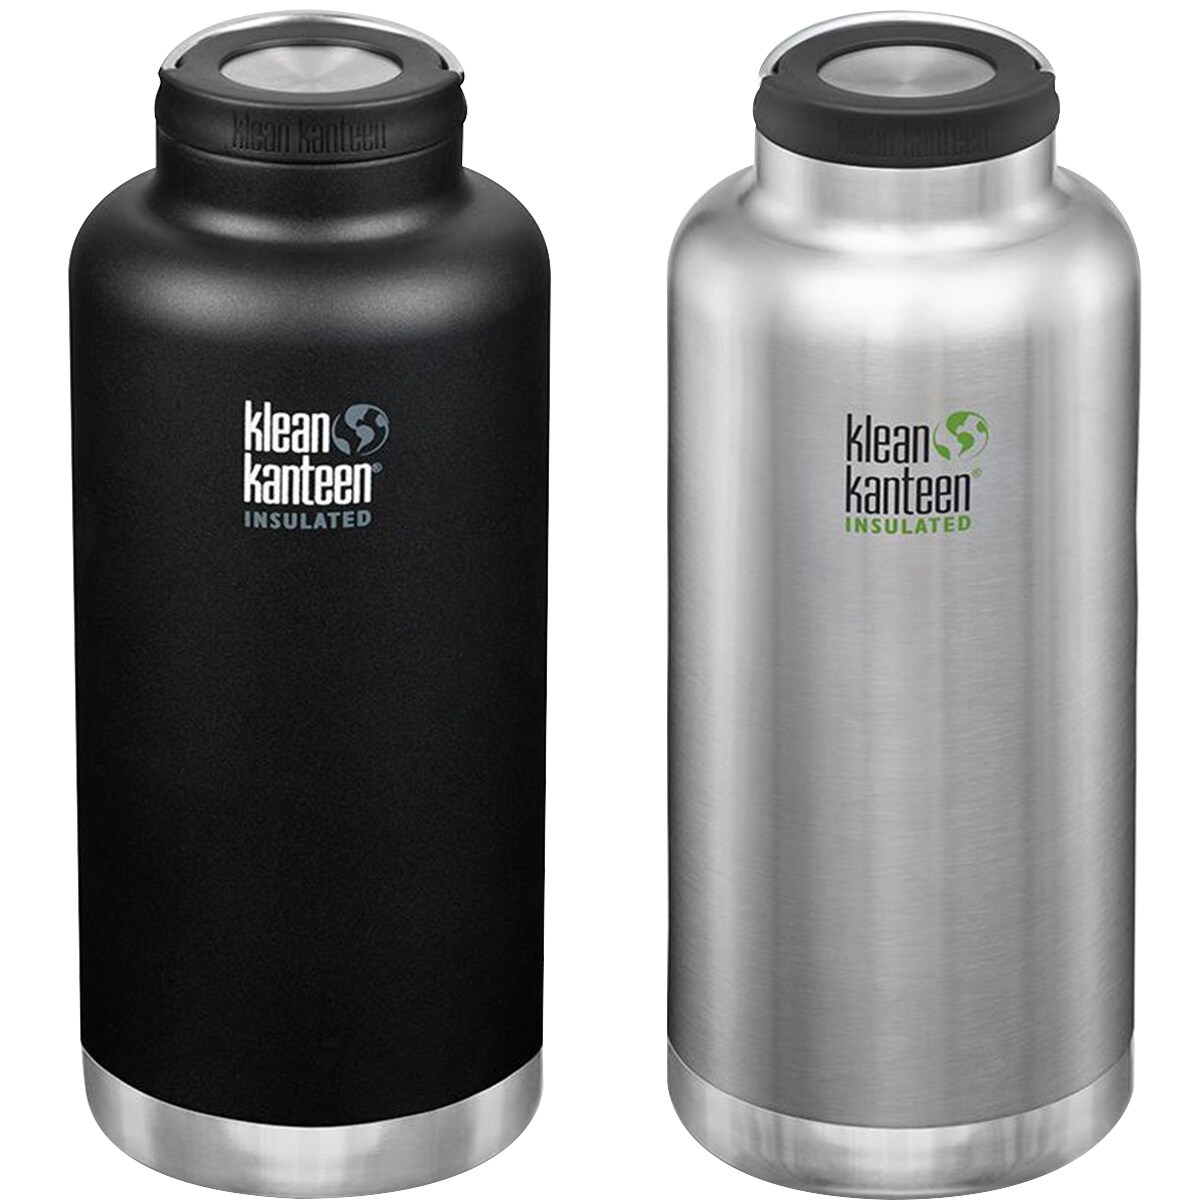 Shop For Klean Kanteen 64 Oz Tkwide Stainless Steel Bottle With Wide Loop Cap Get Free Delivery On Everything At Overstock Your Online Kitchen Dining Store Get 5 In Rewards With Club O